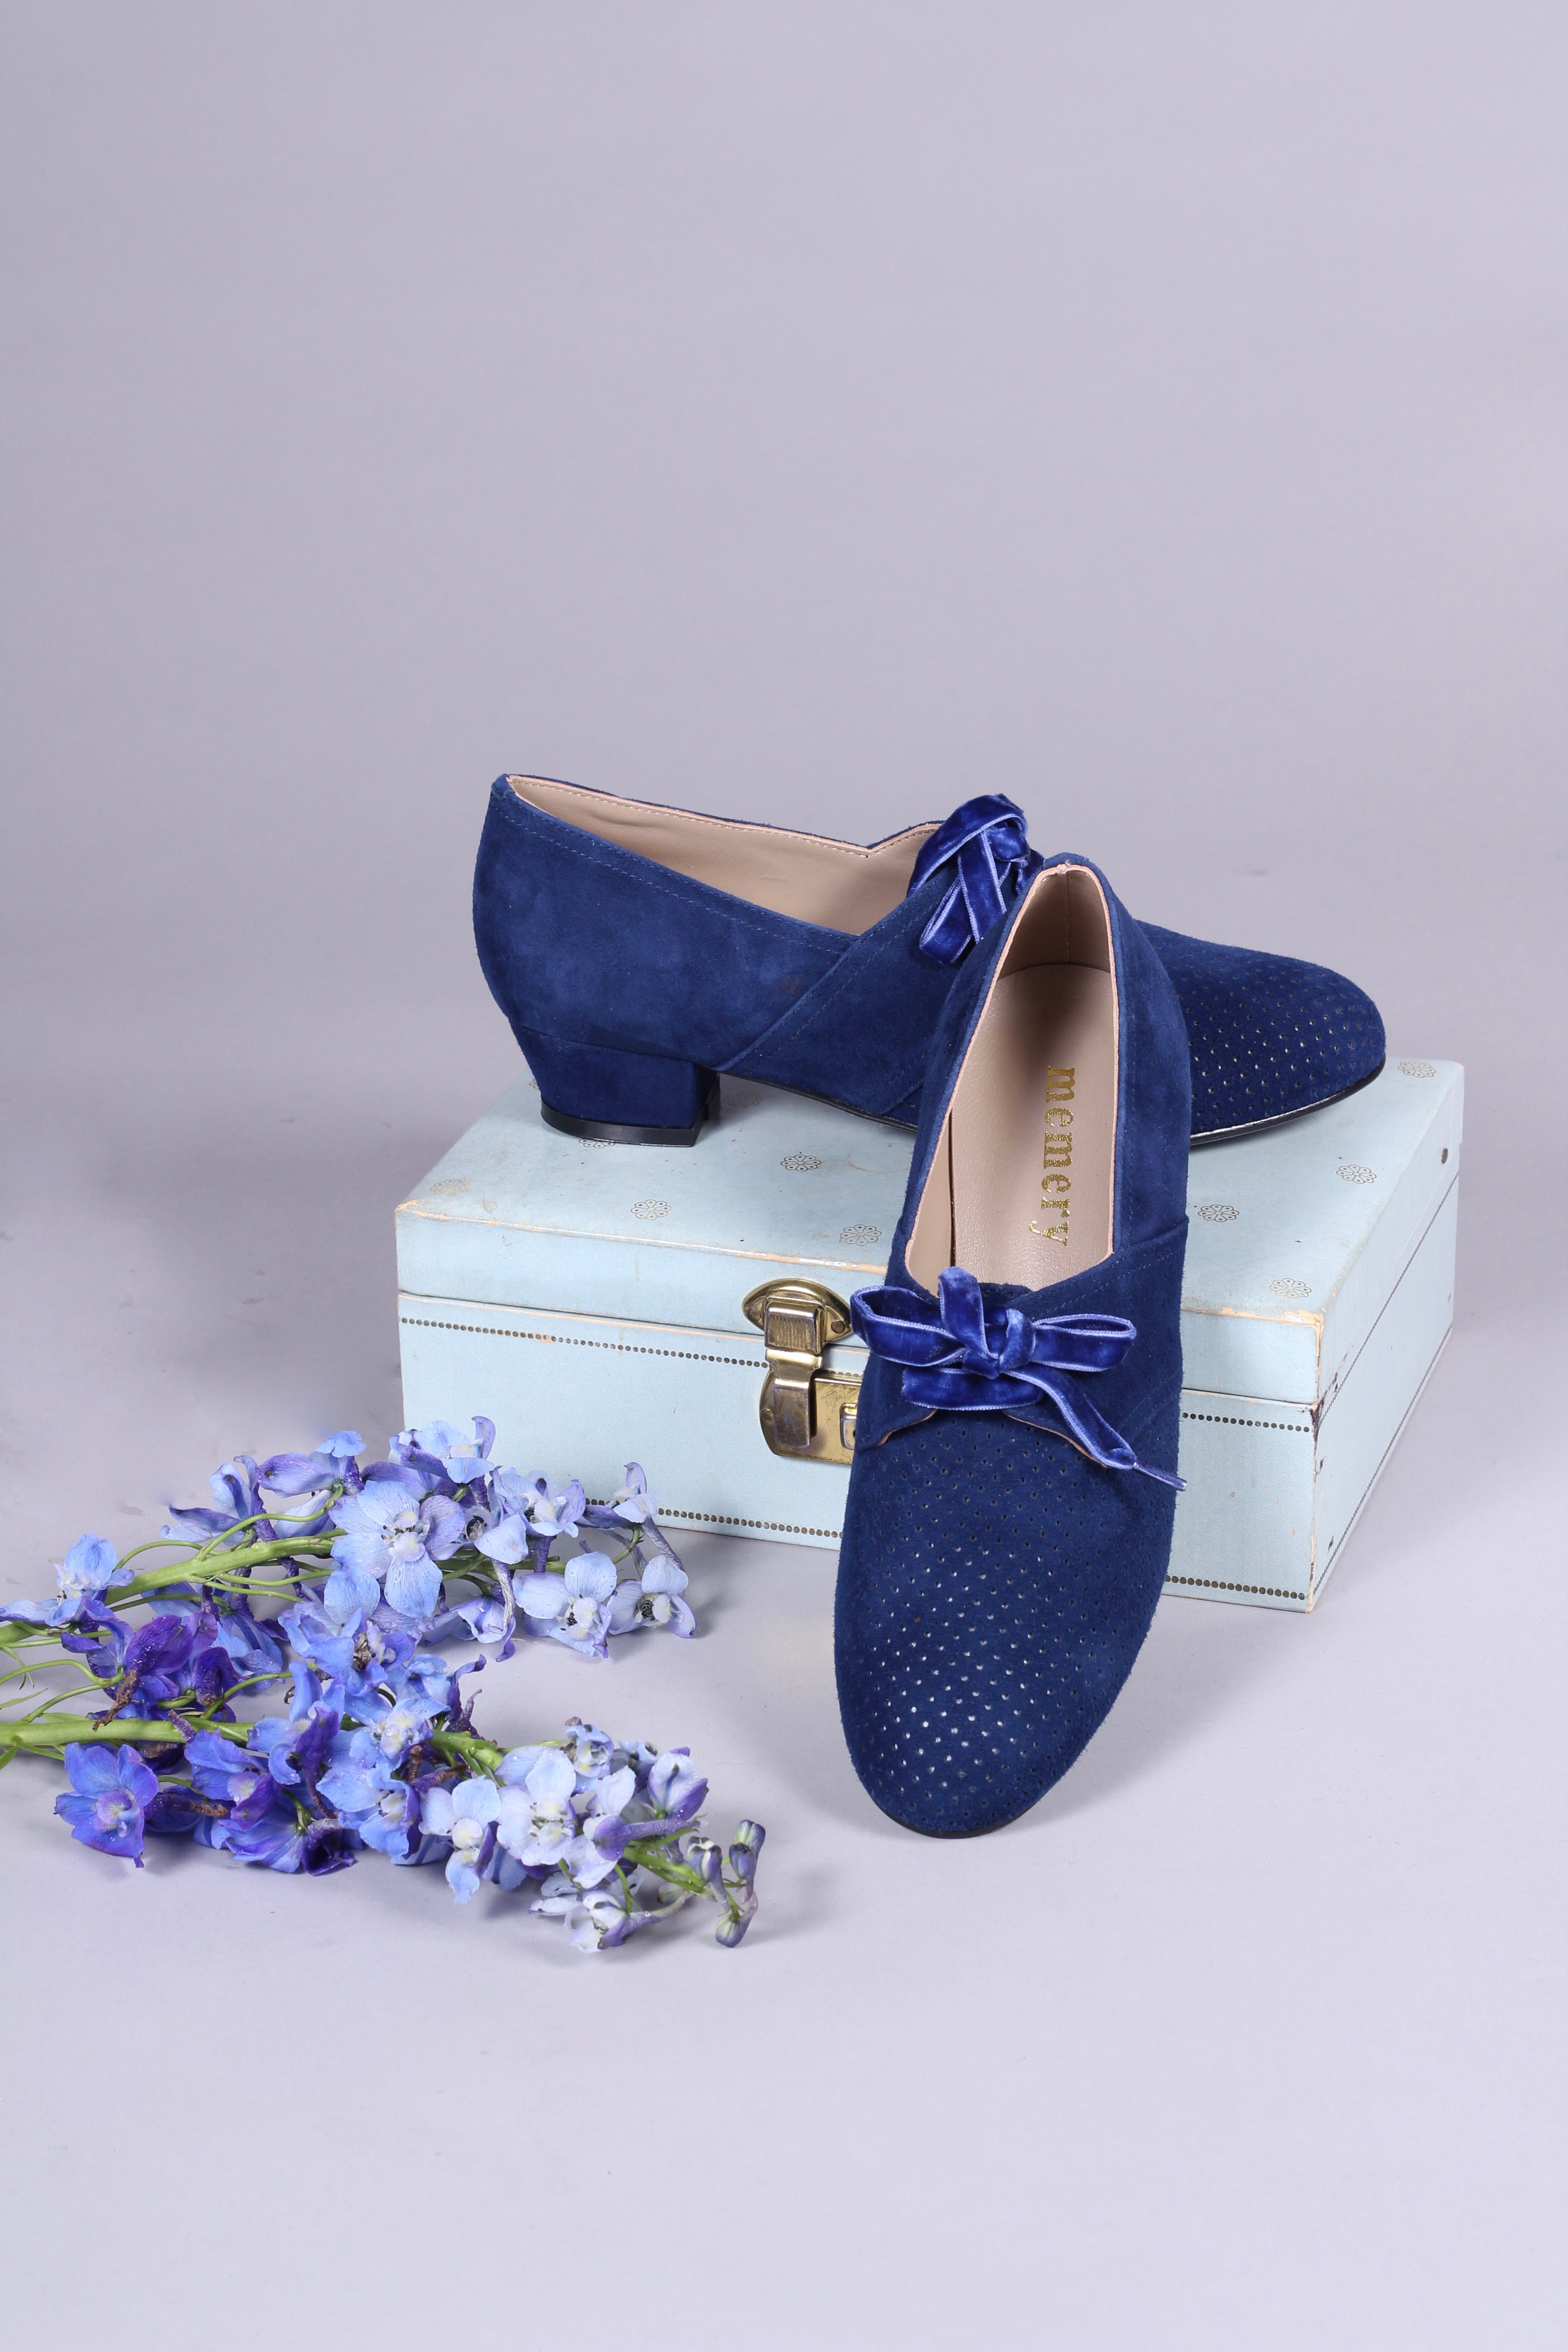 40s Oxford shoes in suede - Low heel - Navy Blue - Esther